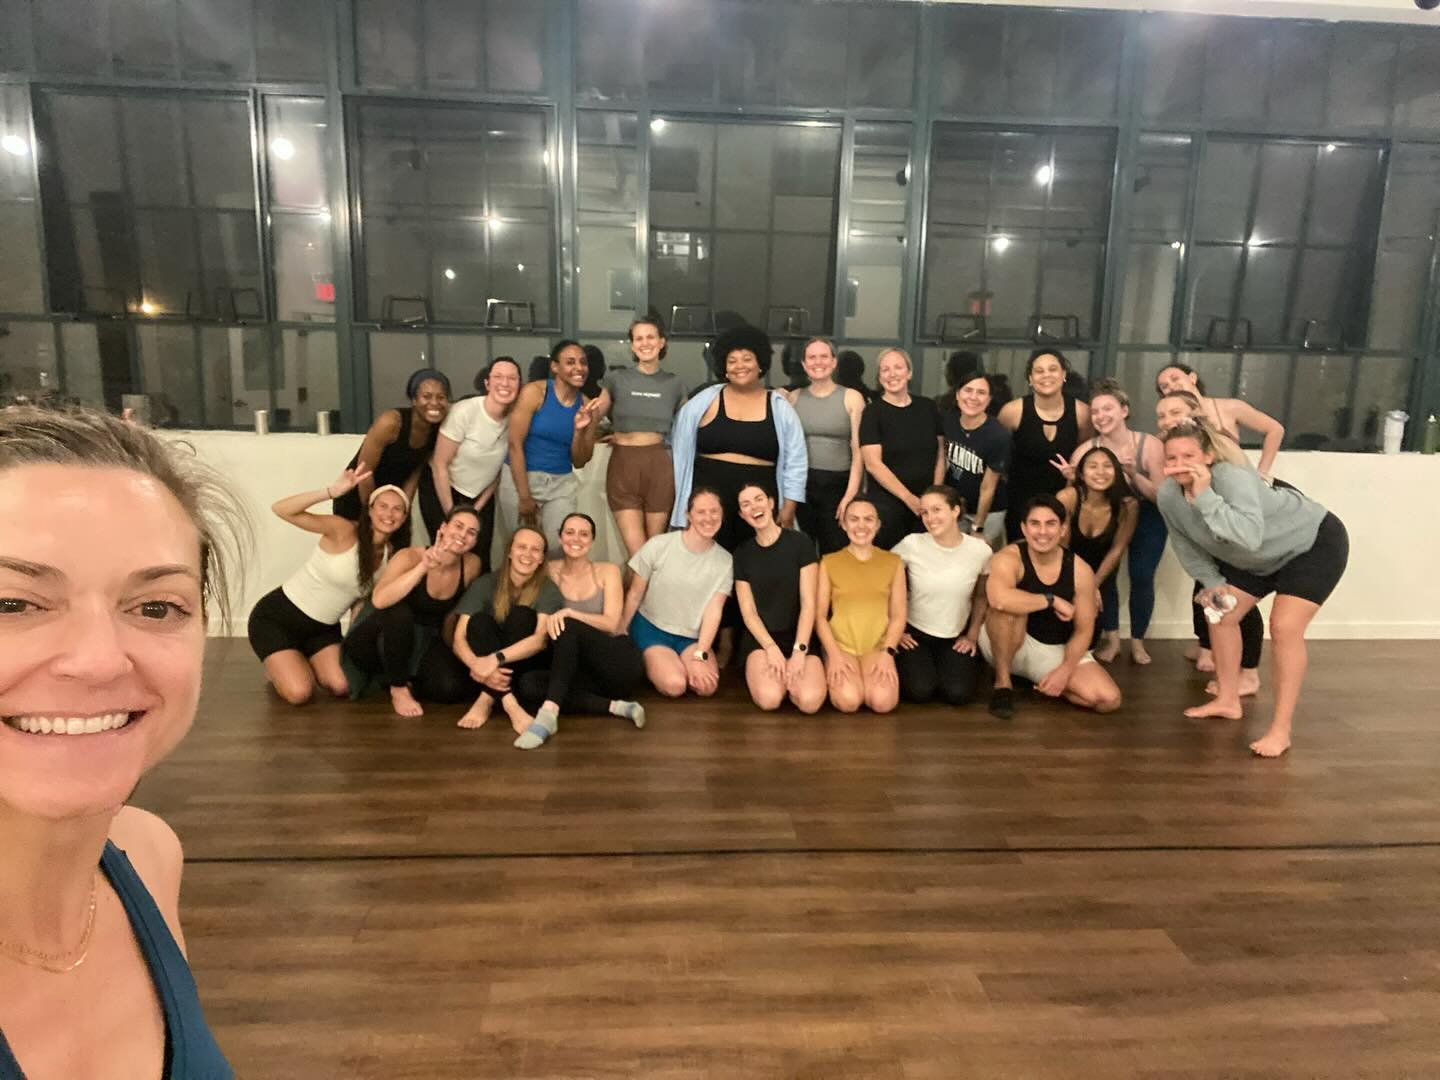 Let&rsquo;s hear it for our teaching team at Yoga Habit!

Our teaching team is 💯!! When we come together for team meetings, we reflect on our mission of connection at the studio and how each time we show up to teach, it is an opportunity to serve ou